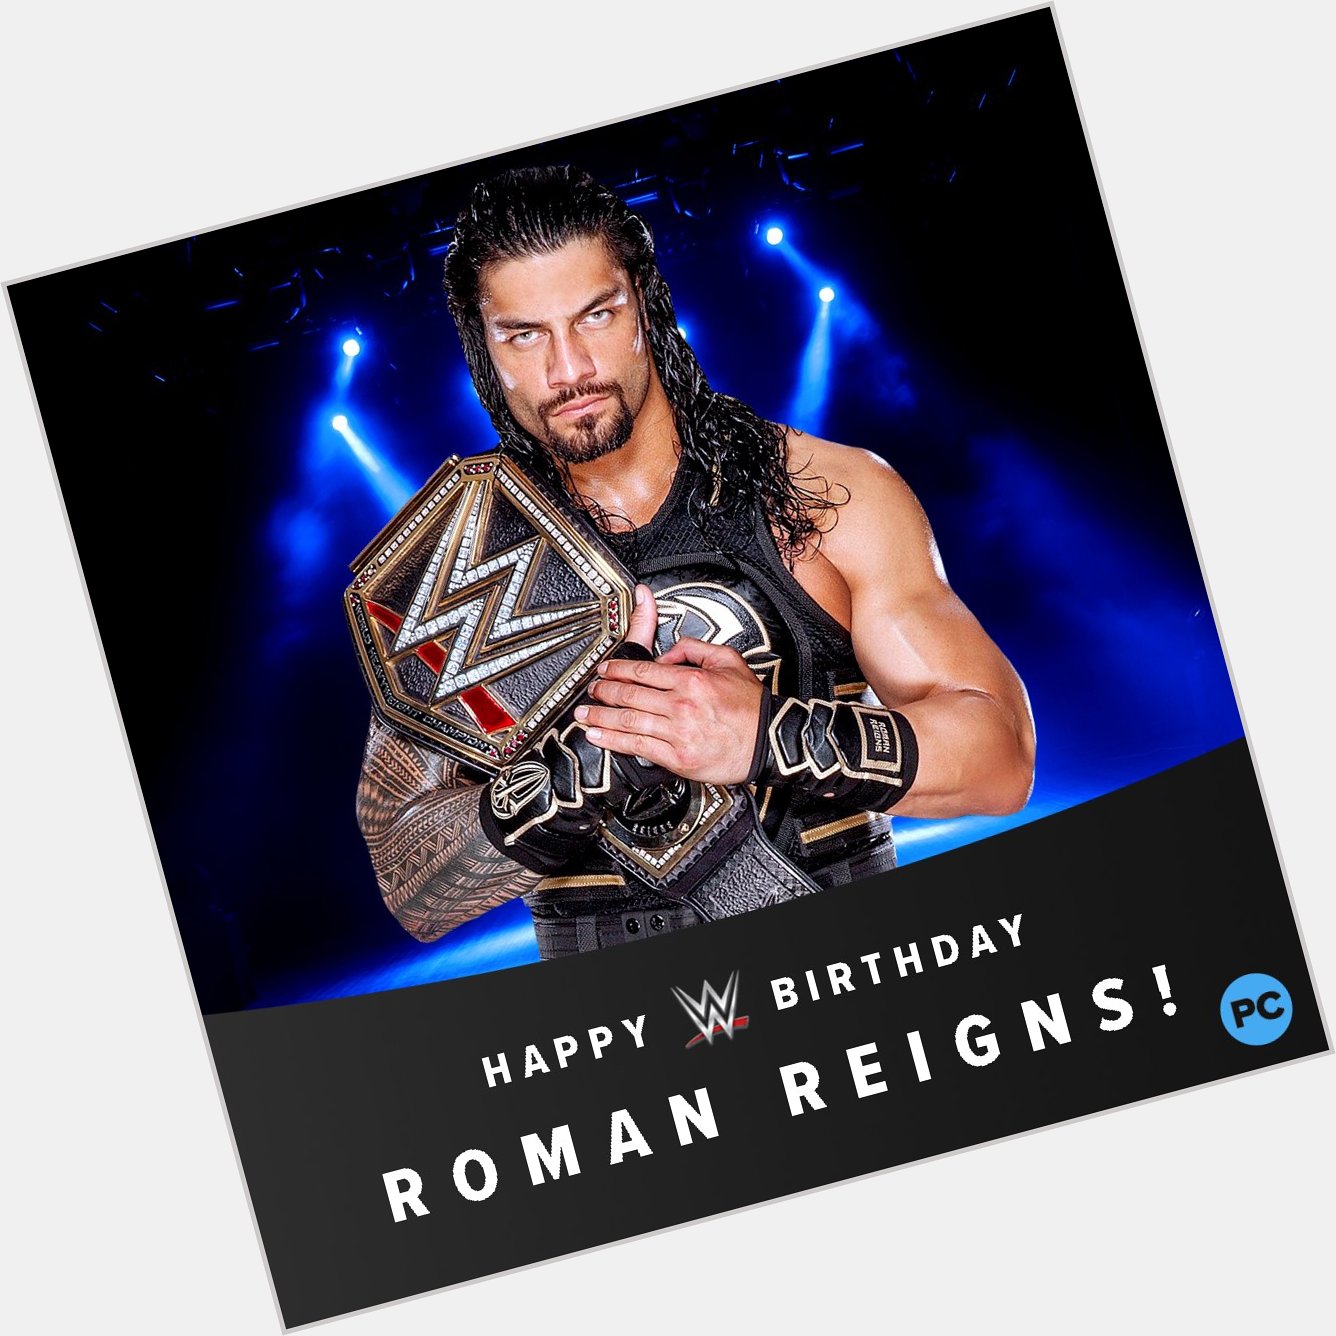 Happy birthday to the most interesting social experiment in WWE history, Roman Reigns! 